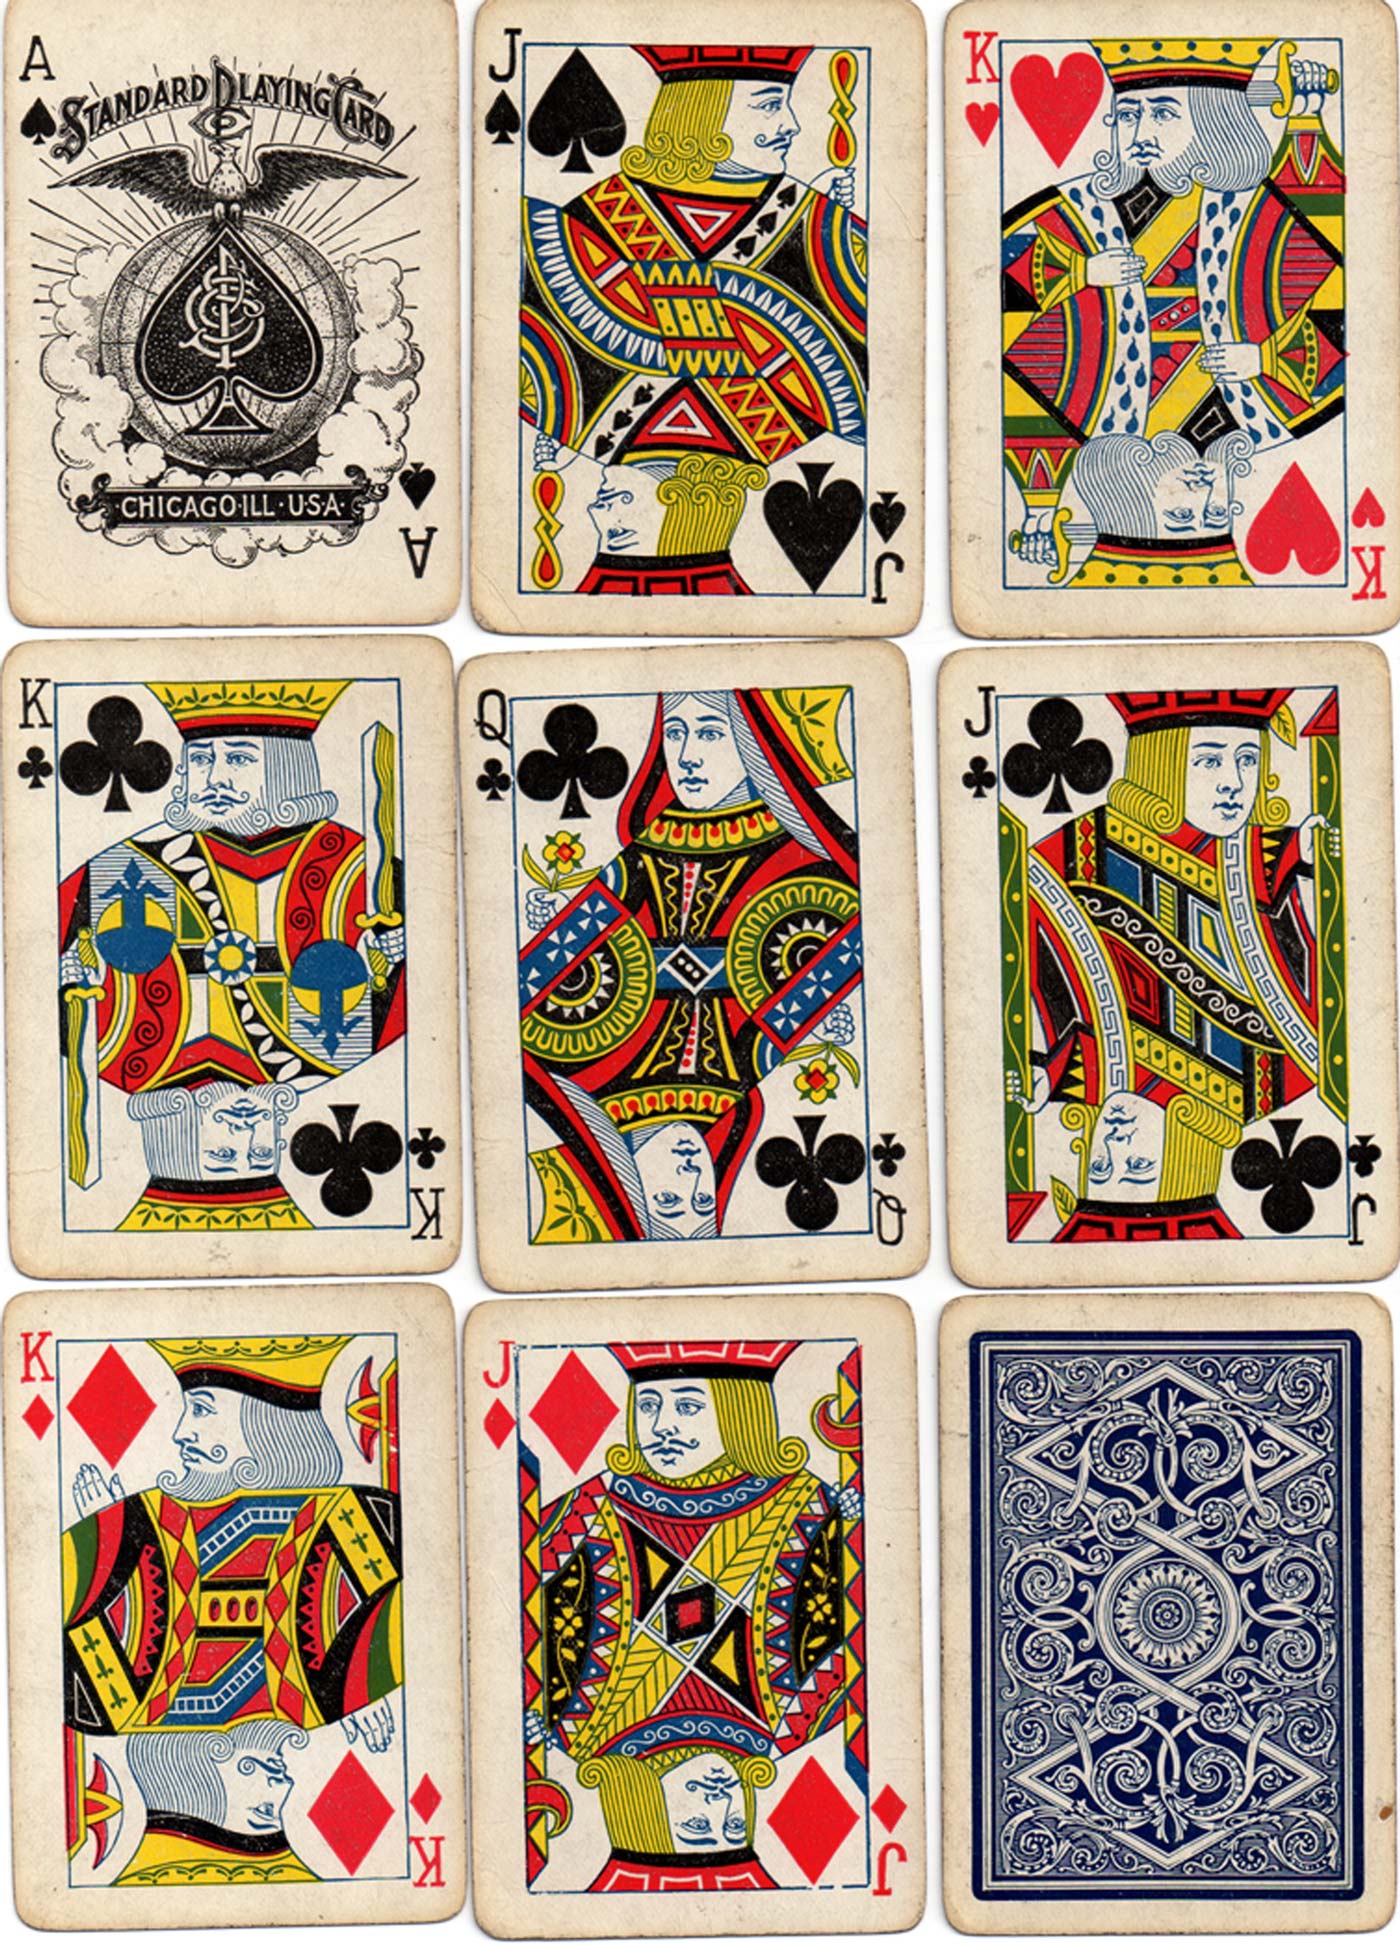 Standard Playing Card Co. - The World of Playing Cards